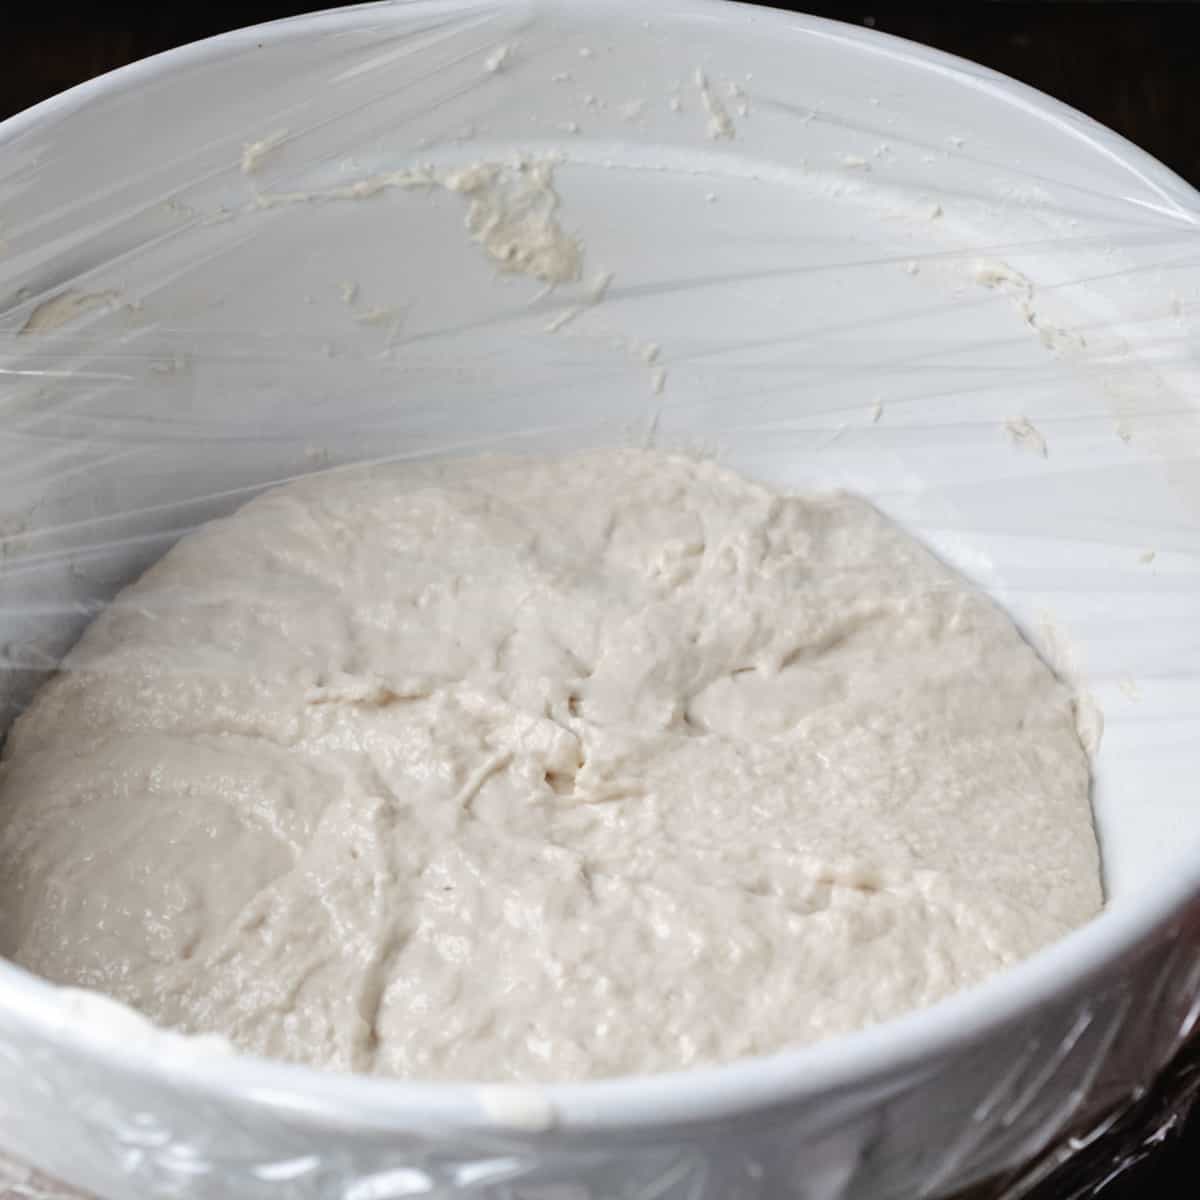 Bread dough in a bowl, covered with plastic wrap.